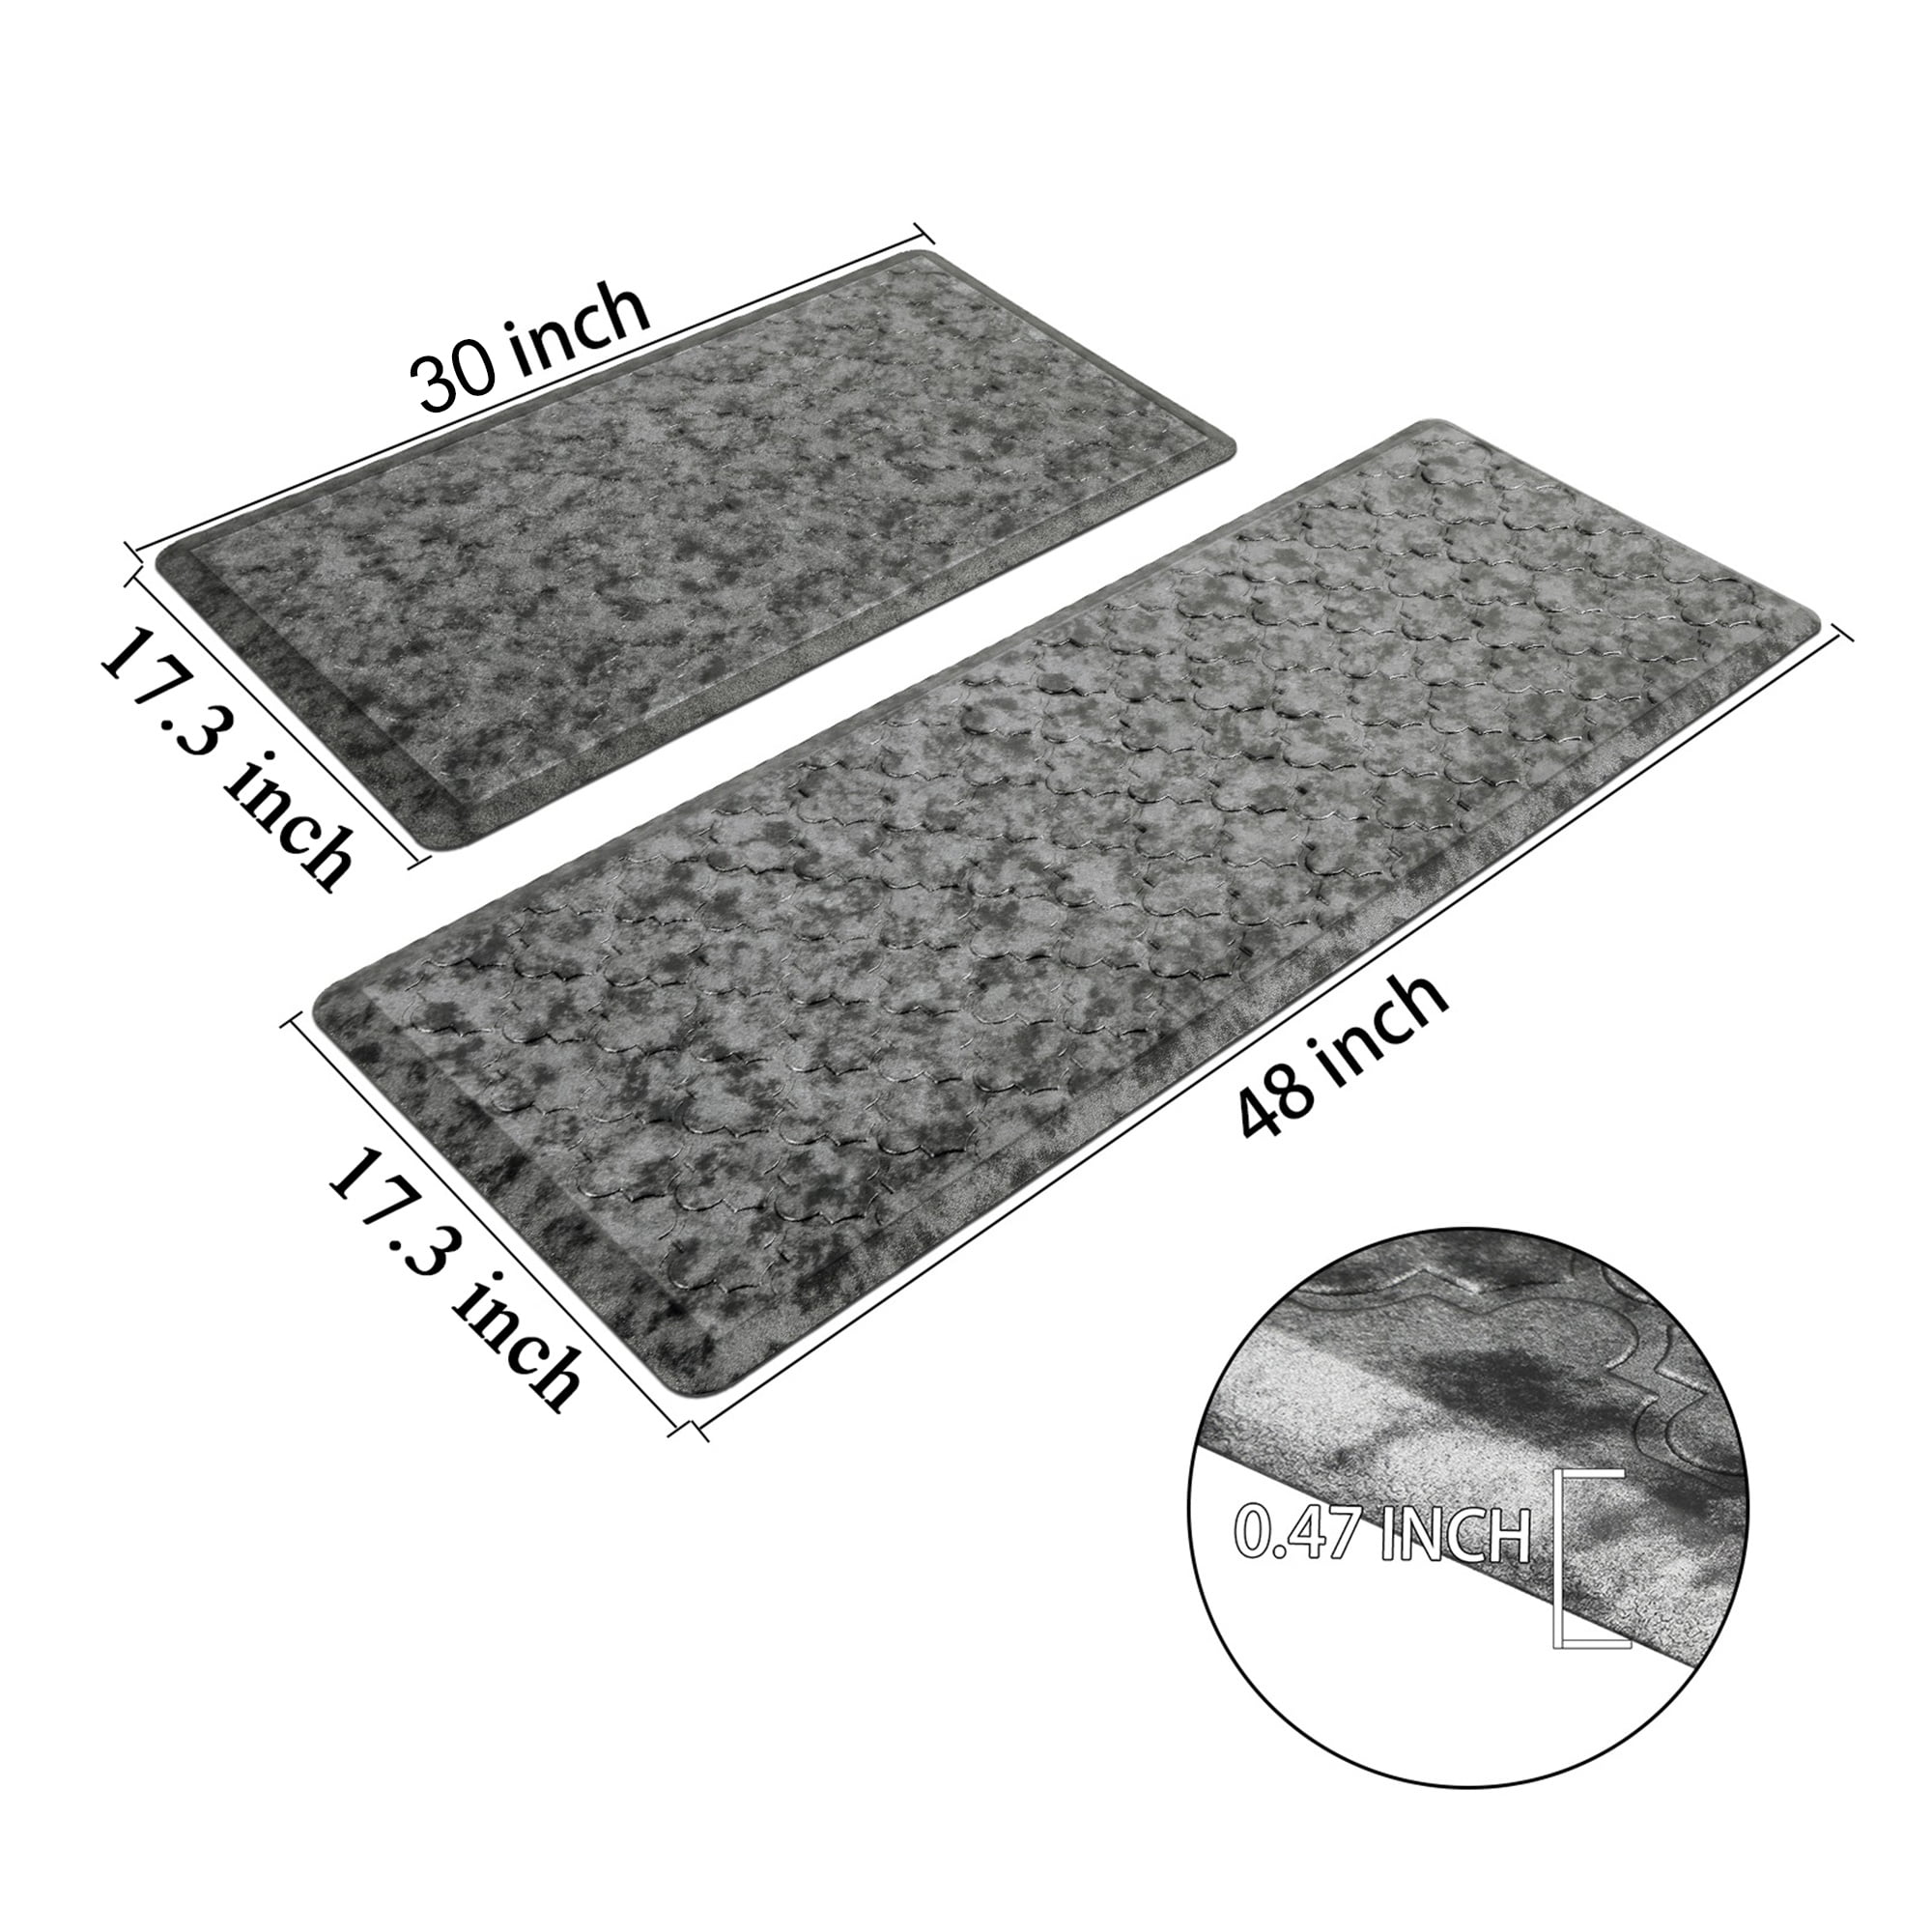  KOKHUB Kitchen Mat and Rugs 2 PCS, Cushioned 1/2 Inch Thick  Anti Fatigue Waterproof Comfort Standing Desk/ Kitchen Floor Mat with  Non-Skid & Washable for Home, Office, Sink - Grey 